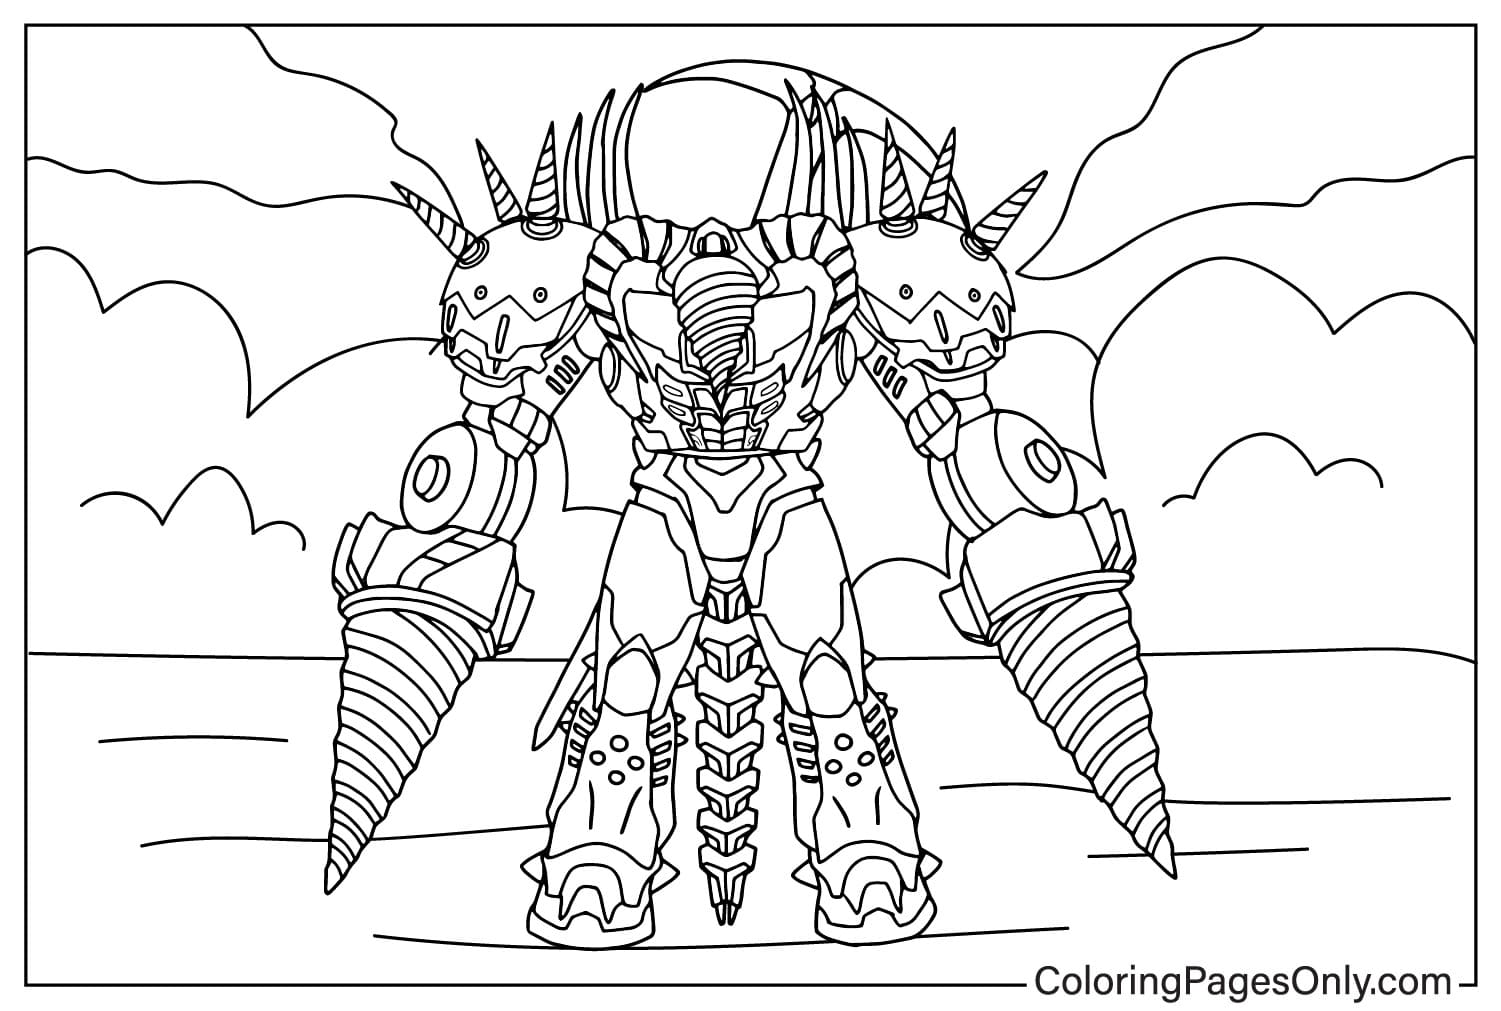 Upgraded Titan Drill Man Coloring Page from Upgraded Titan Drill Man